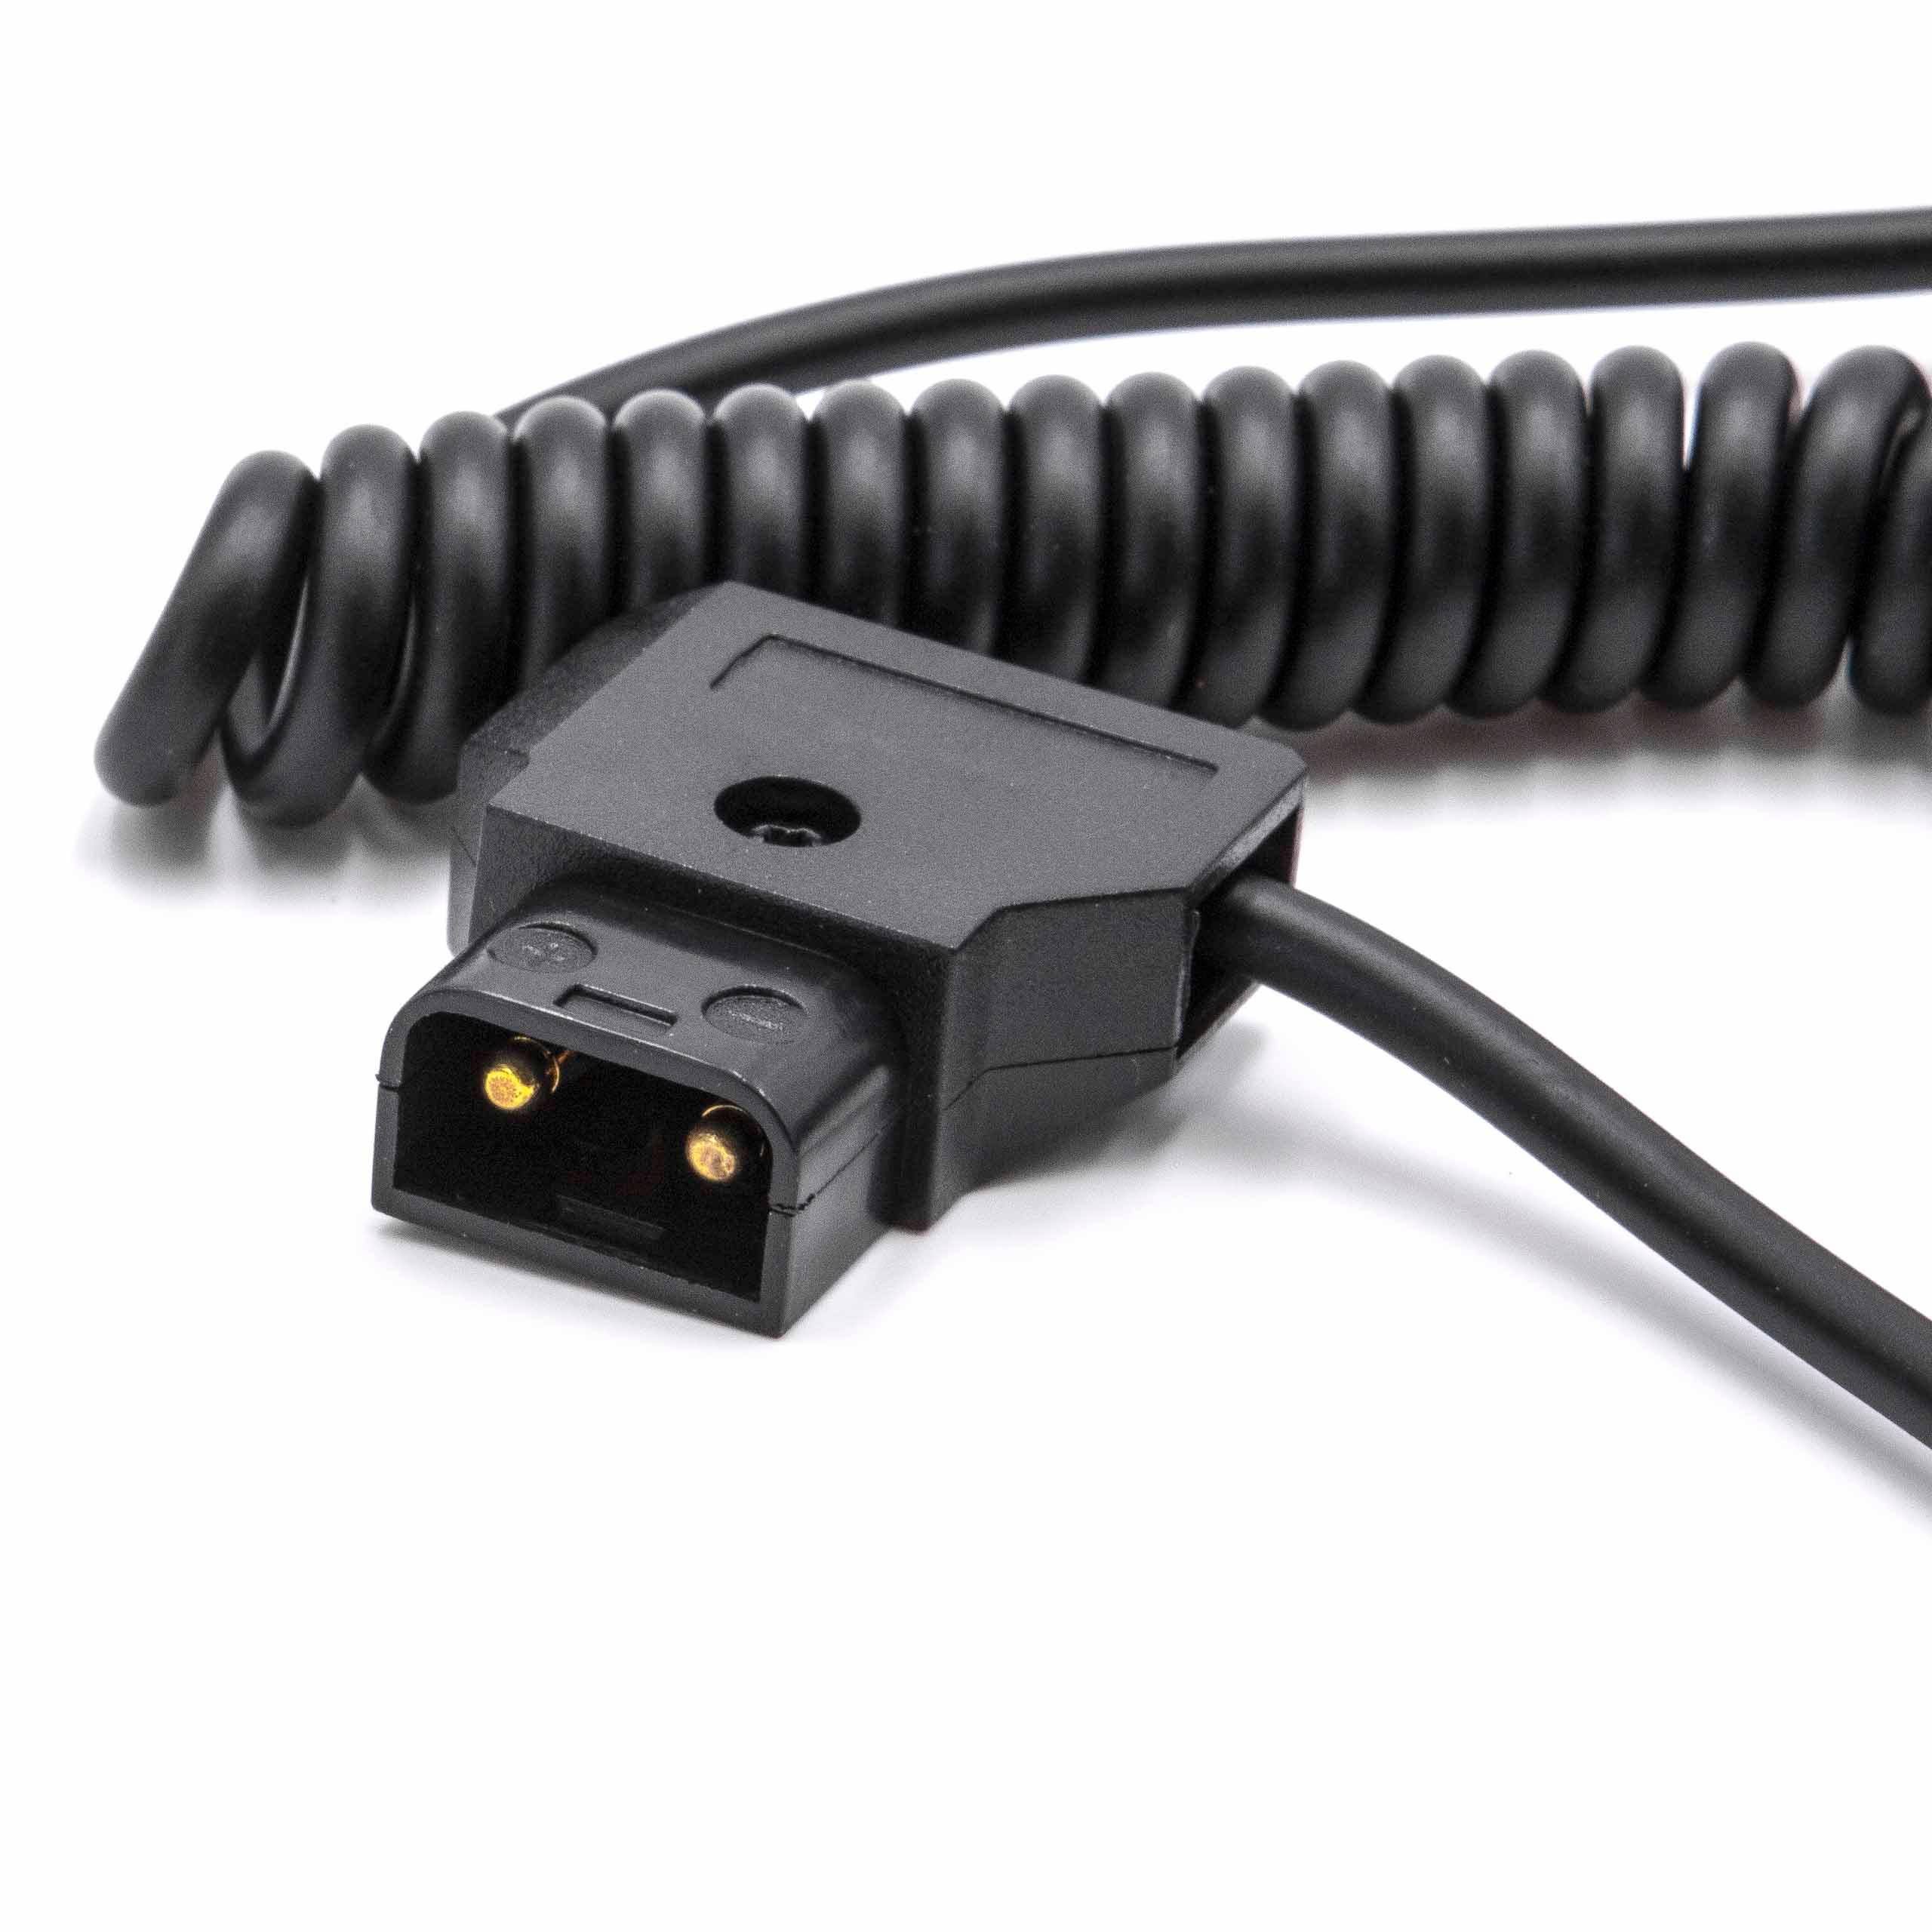 Adapter Cable D-Tap (male) to 1x D-Tap (female) suitable for Anton Bauer D-Tap, Dionic Camera - Black